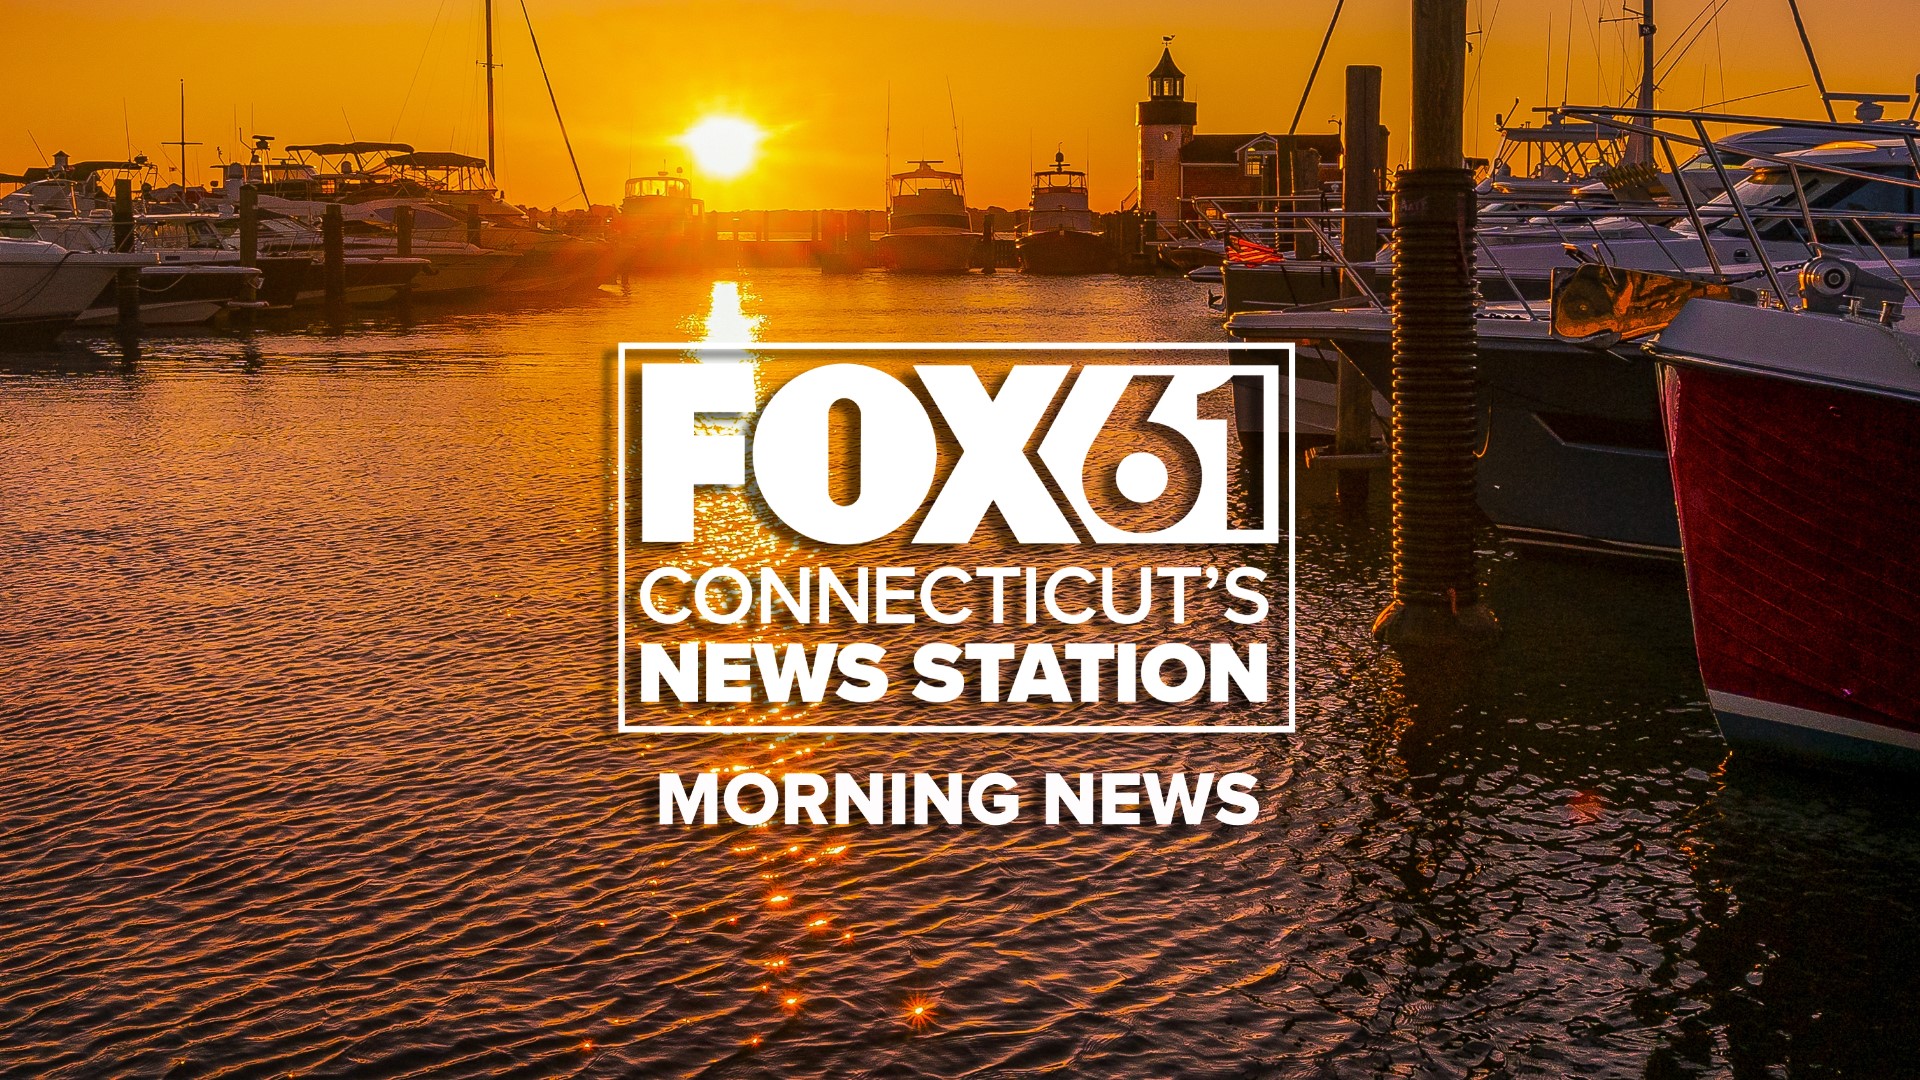 These are the top stories in Connecticut on Sept. 19 on the FOX61 Morning News at 6 a.m.